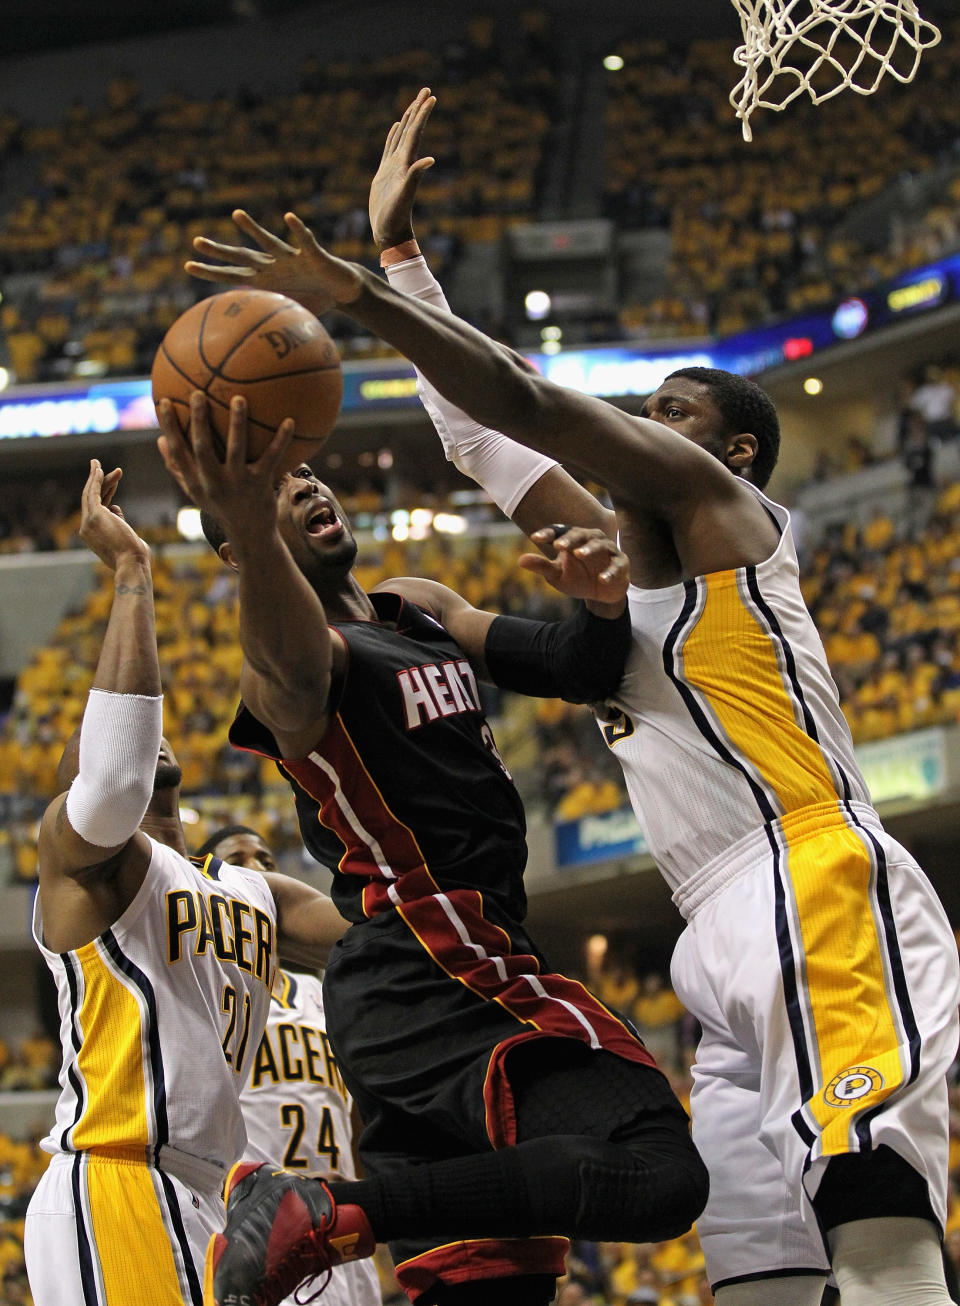 INDIANAPOLIS, IN - MAY 24: Dwyane Wade #3 of the Miami Heat shoots between David West #21 and Roy Hibbert #55 of the Indiana Pacers in Game Six of the Eastern Conference Semifinals in the 2012 NBA Playoffs at Bankers Life Fieldhouse on May 24, 2012 in Indianapolis, Indiana. NOTE TO USER: User expressly acknowledges and agrees that, by downloading and/or using this photograph, User is consenting to the terms and conditions of the Getty Images License Agreement. (Photo by Jonathan Daniel/Getty Images)